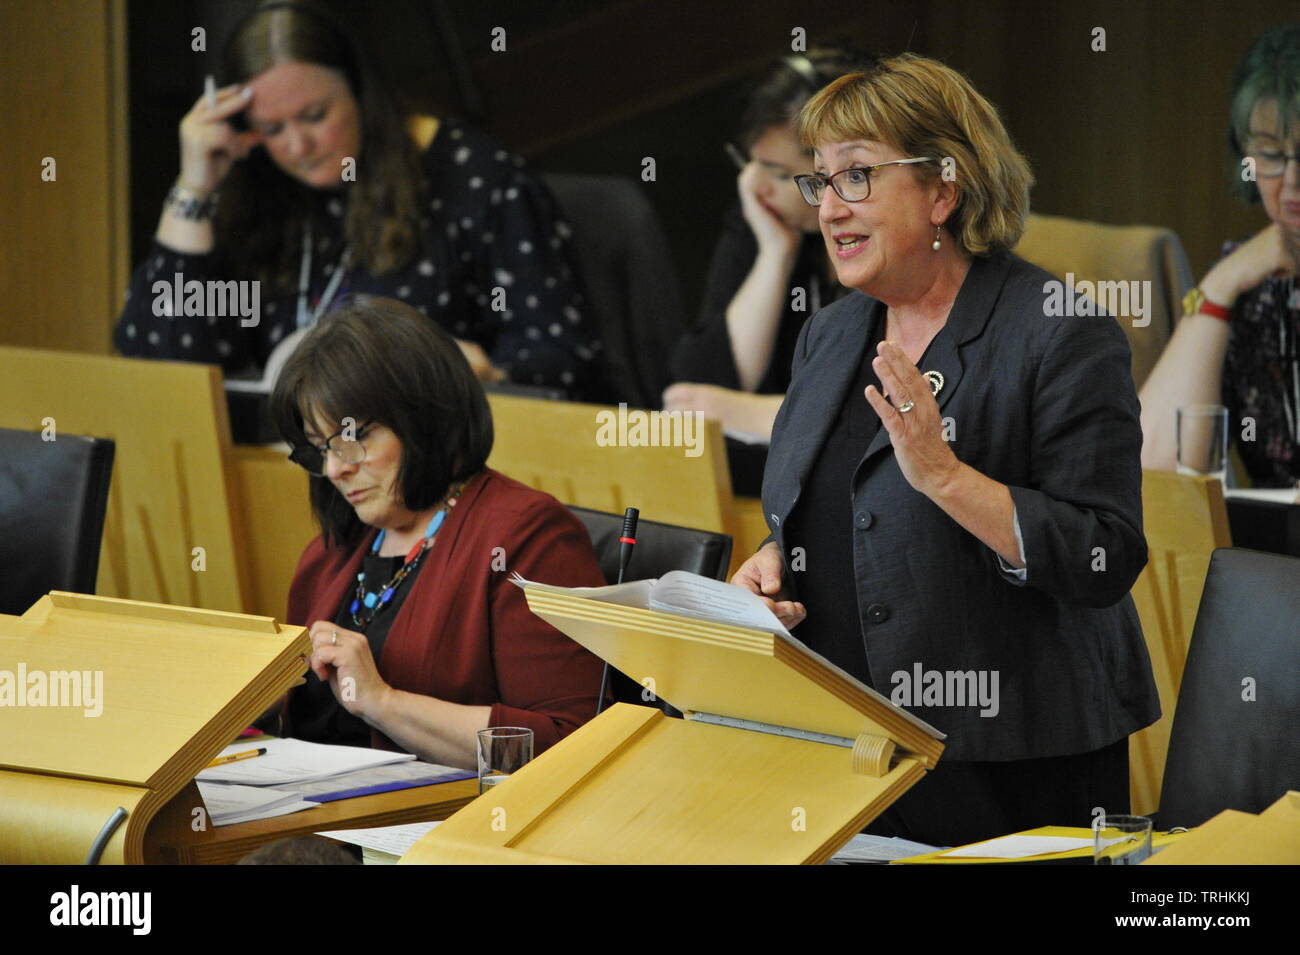 Edinburgh, UK. 6 June 2019. PICTURED: Jeane Freeman (left) and, Annabelle Ewing (right) Afternoon session in the chamber of the Scottish Parliament. Stage 3 Proceedings: Fuel Poverty (Target, Definition and Strategy) Bill. Credit: Colin Fisher/Alamy Live News Stock Photo